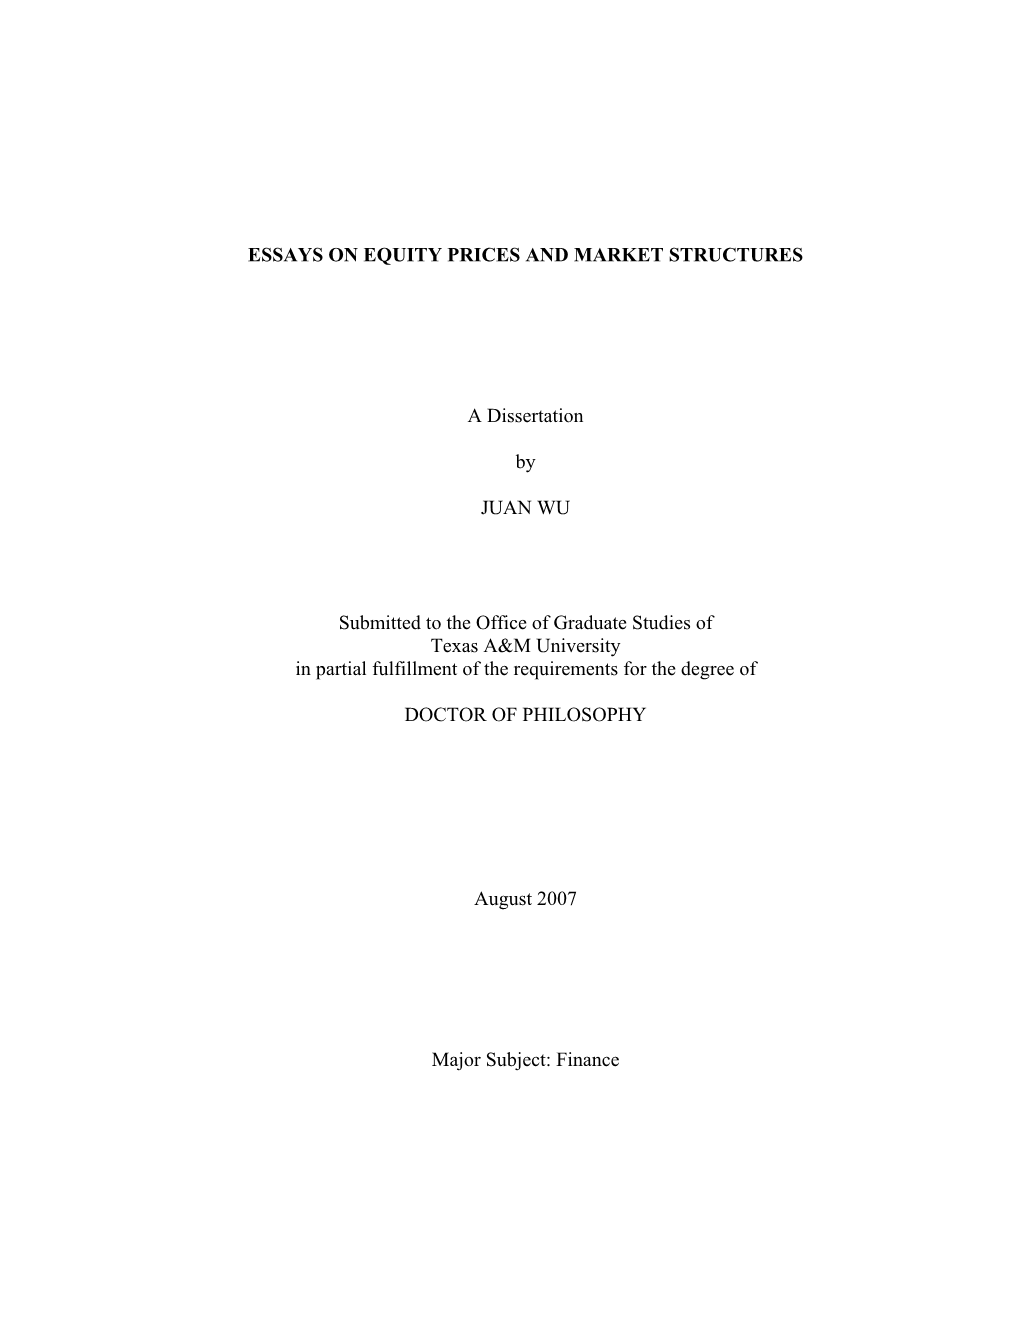 Essays on Equity Prices and Market Structures